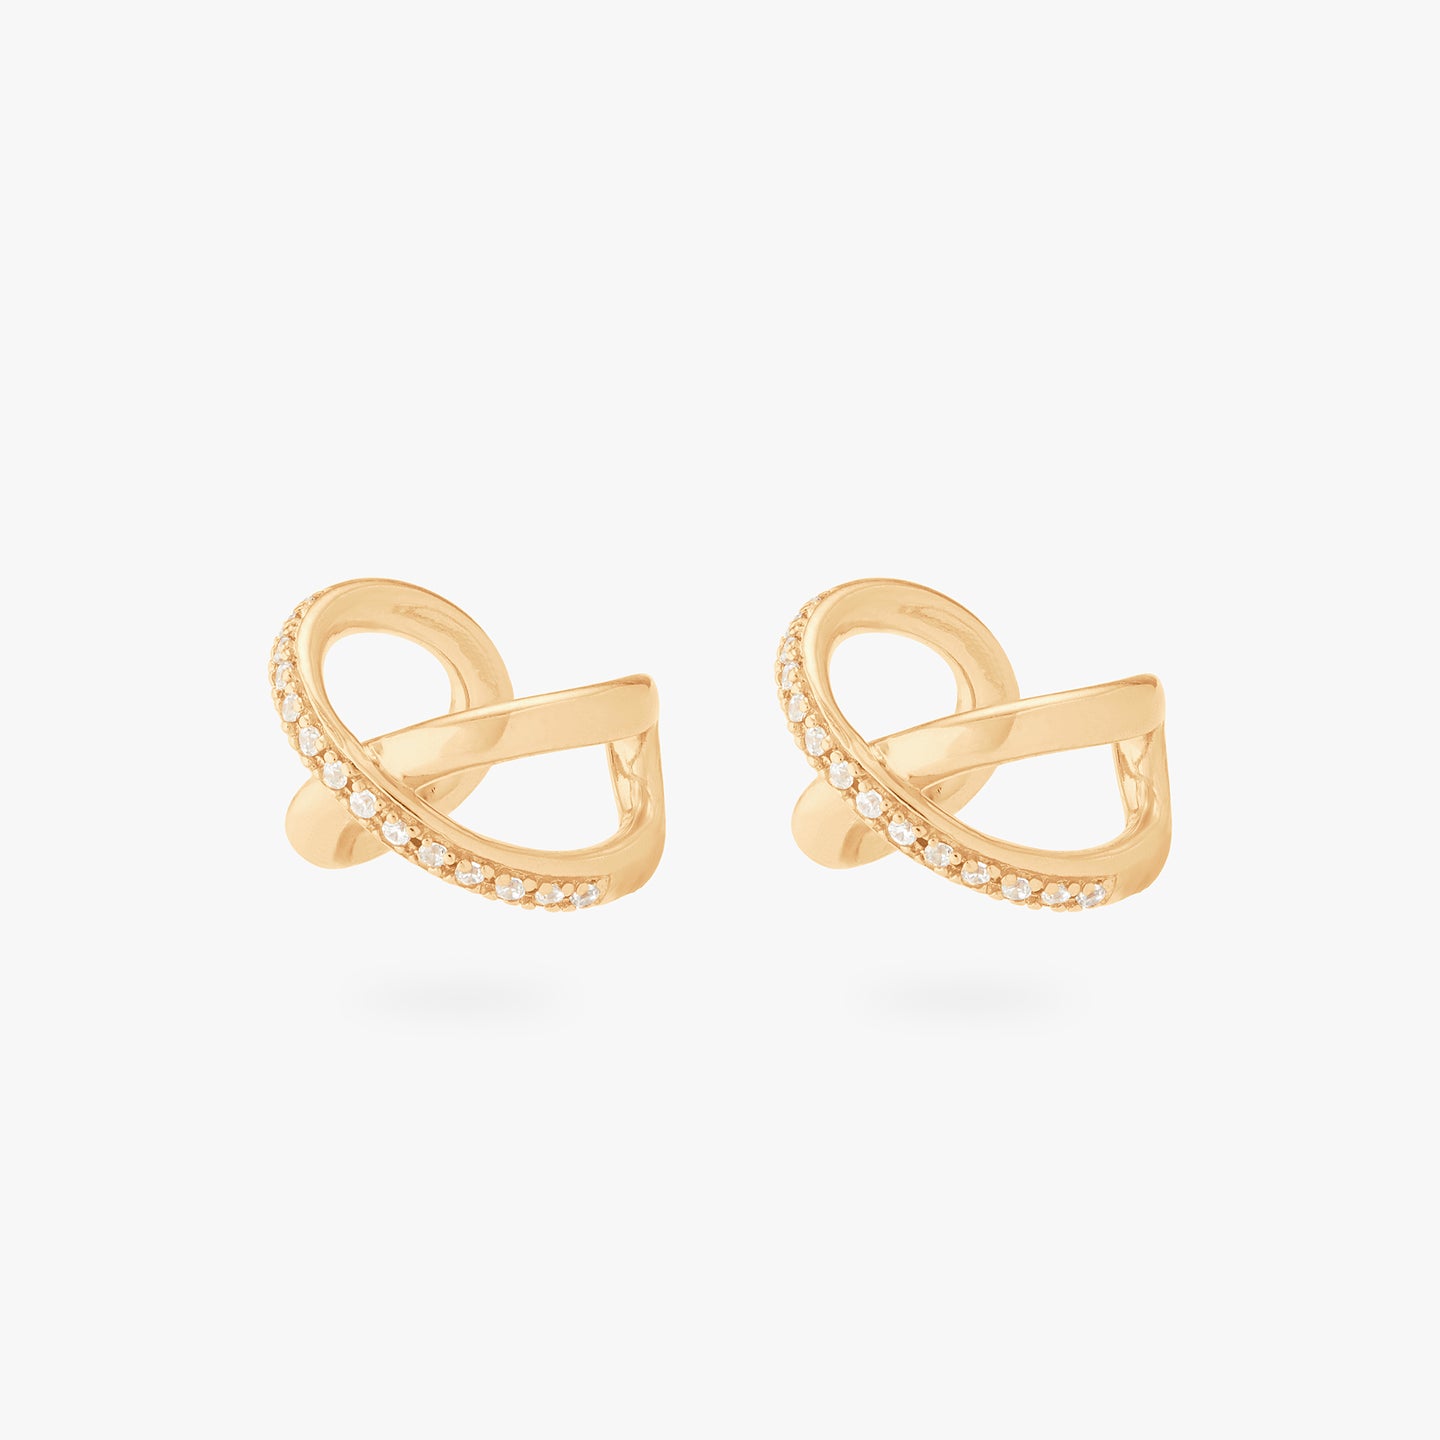 This is an image of a pair of gold twist cuffs that have one side of the twist diagonally lined with gold/clear CZs. [pair] color:null|gold/clear